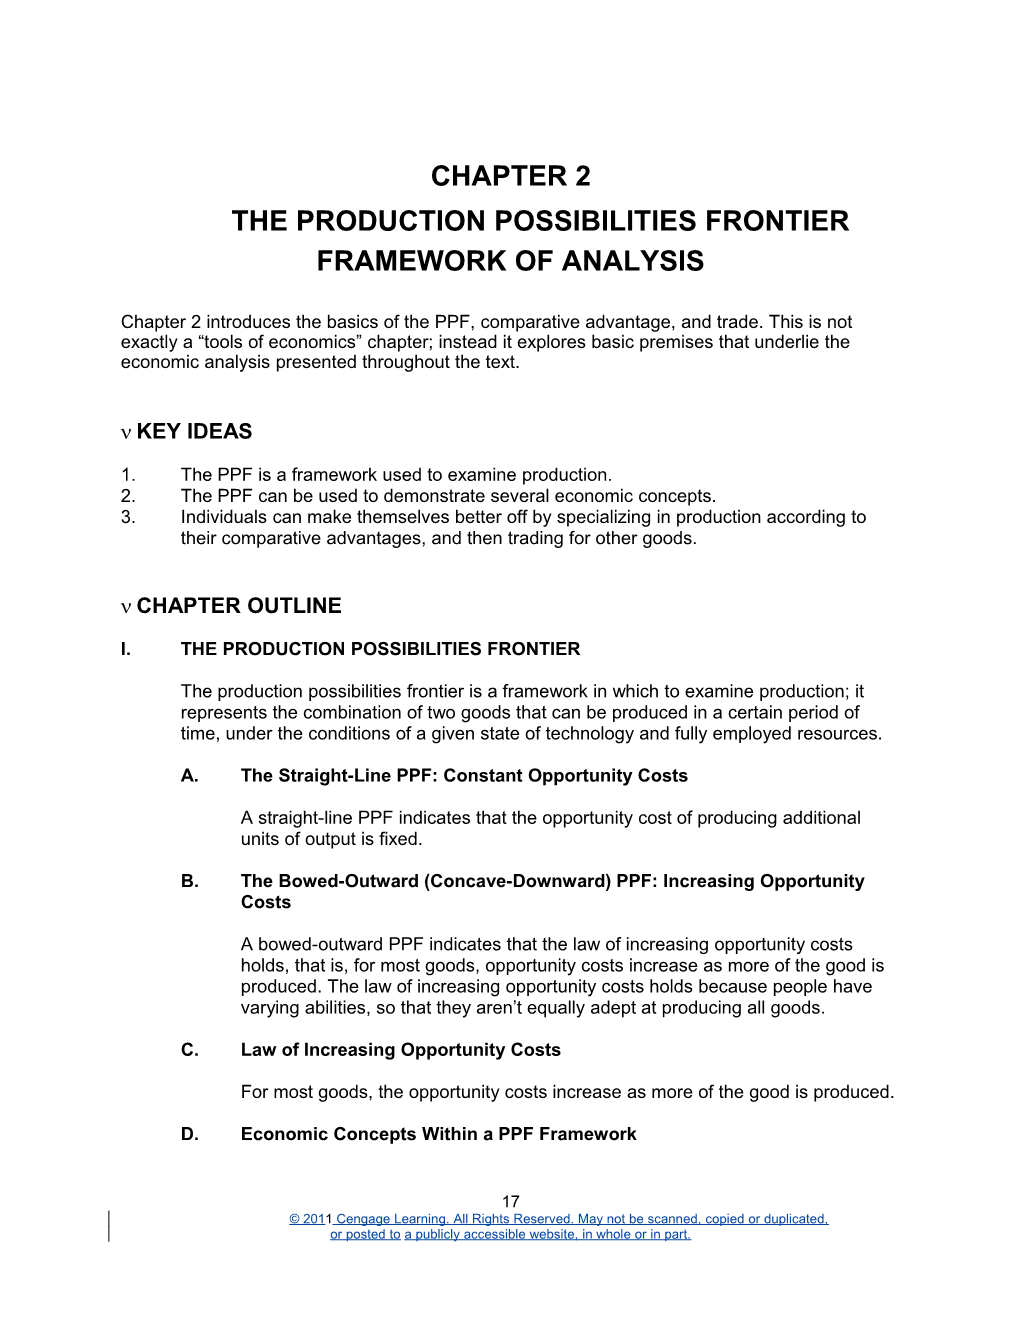 The Production Possibilities Frontier Framework of Analysis